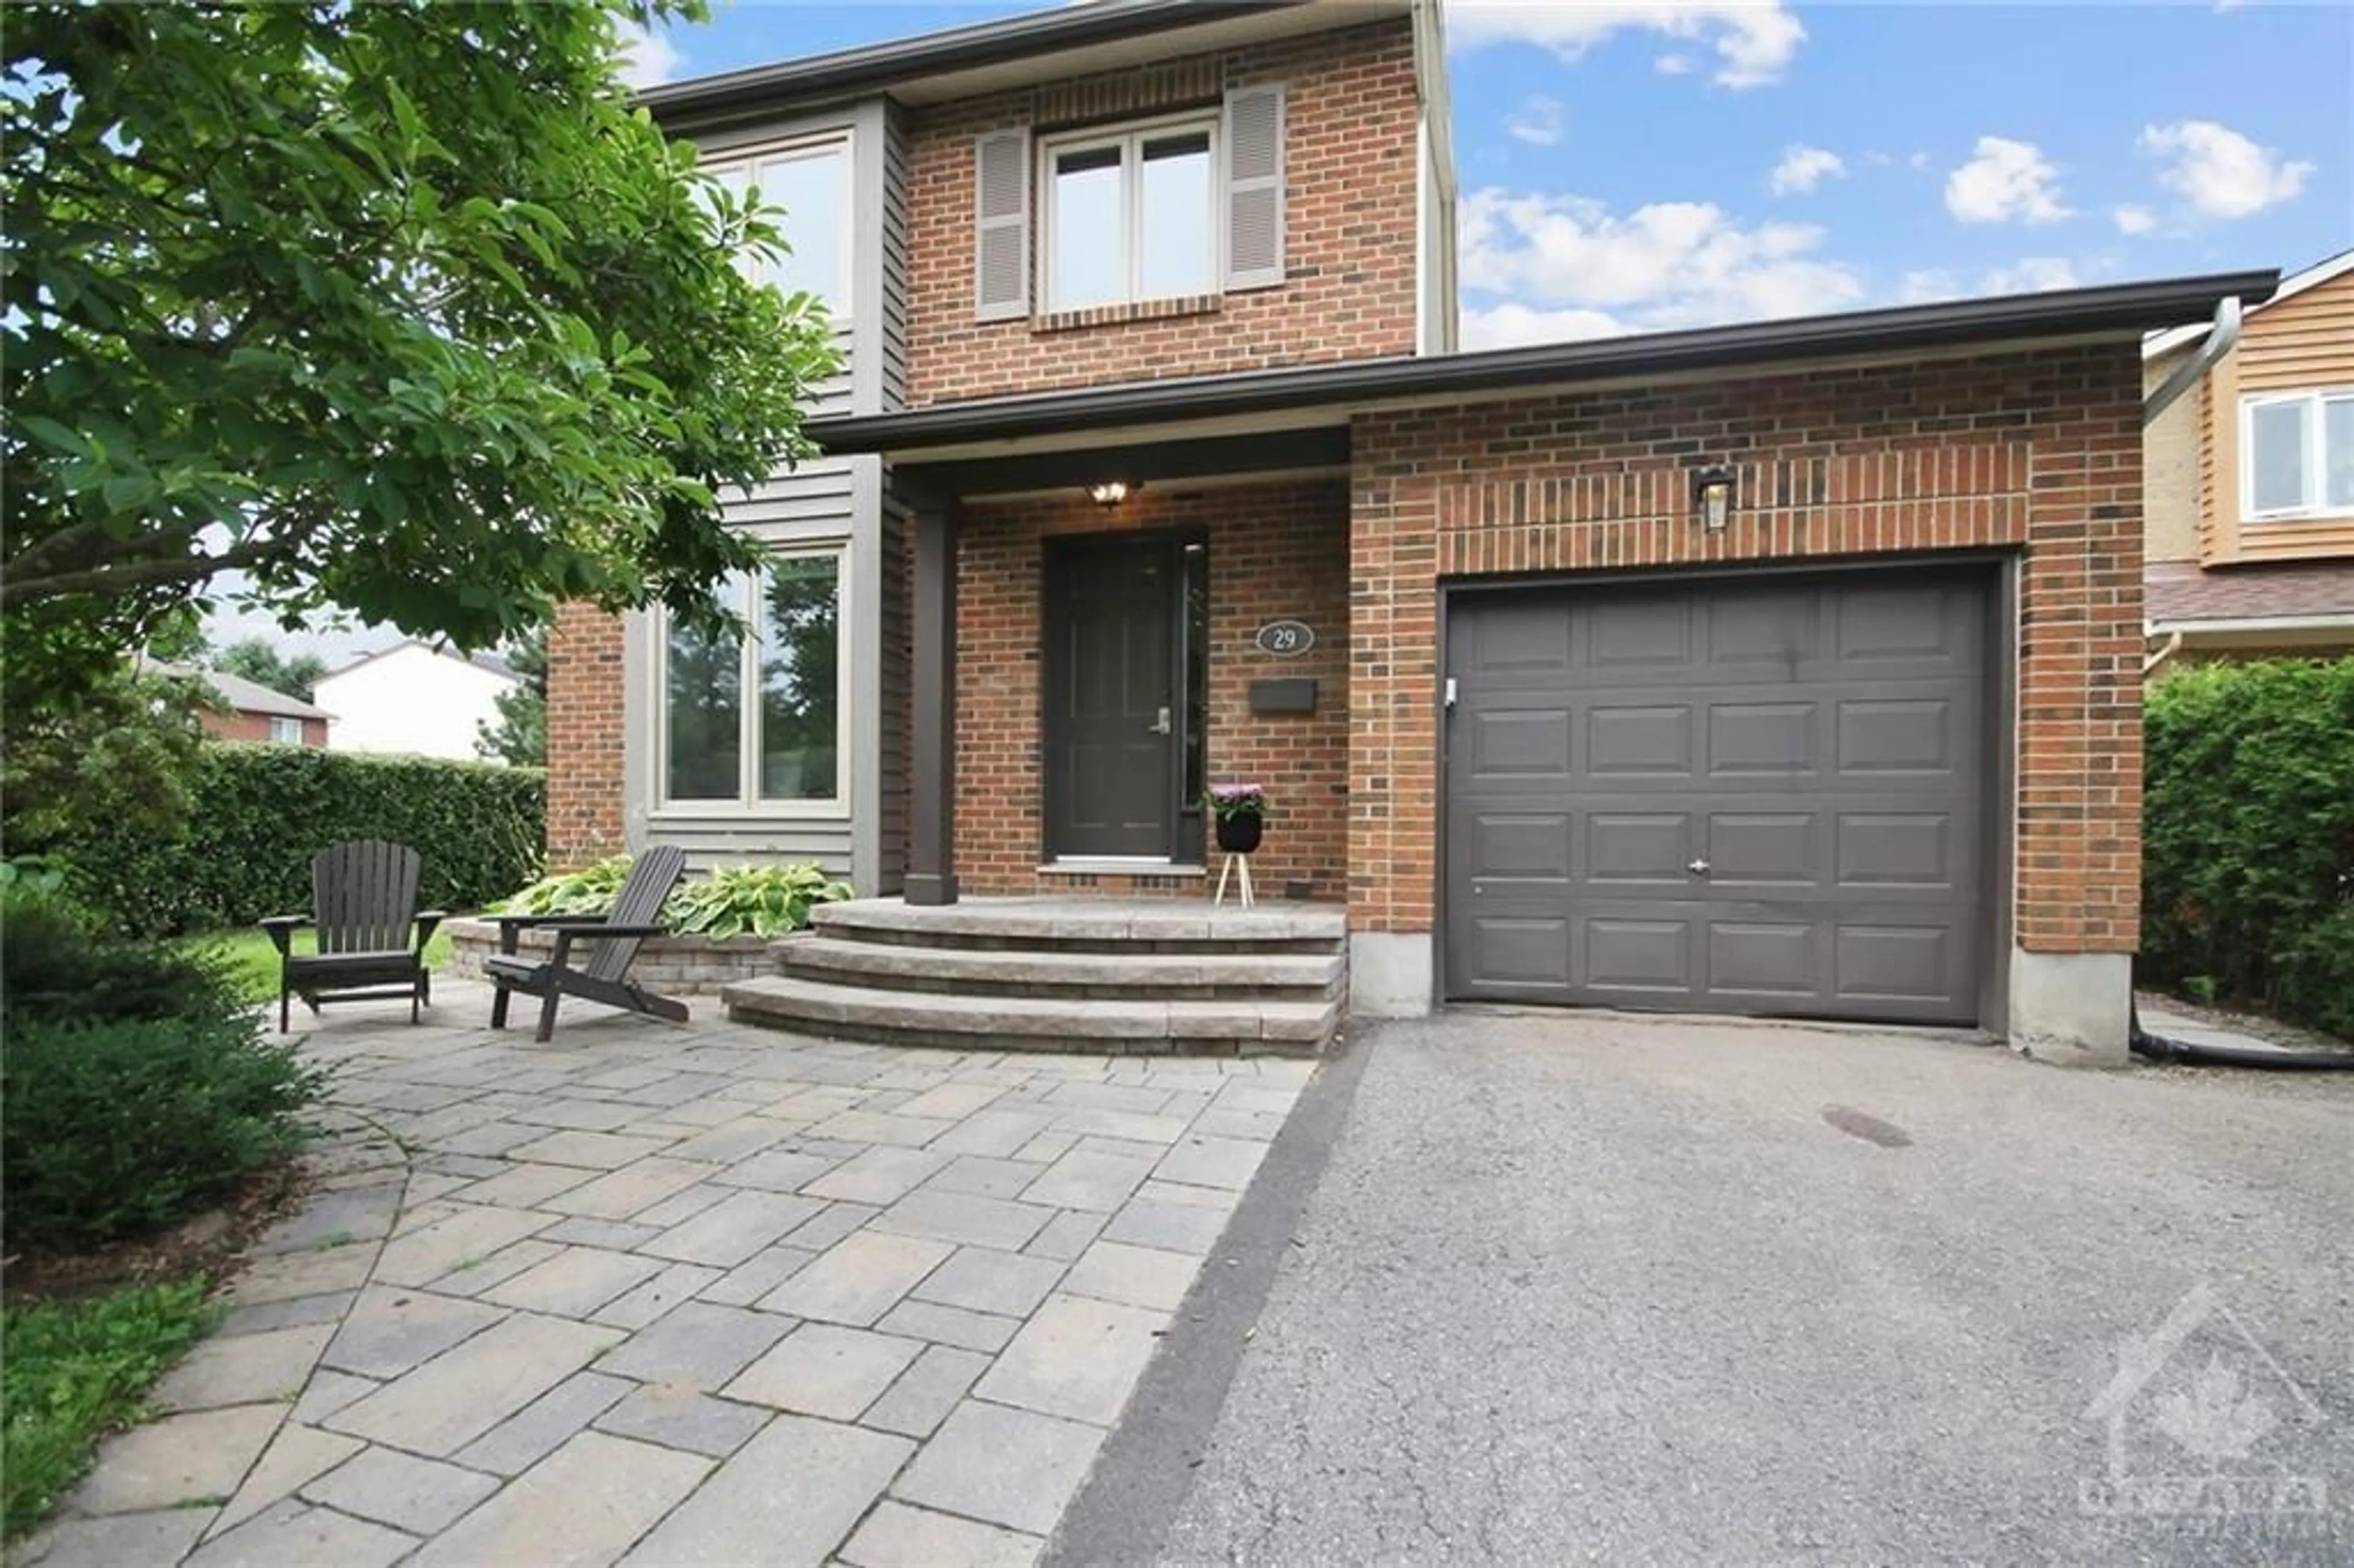 Home with brick exterior material for 29 COOLSPRING Cres, Ottawa Ontario K2E 7M9